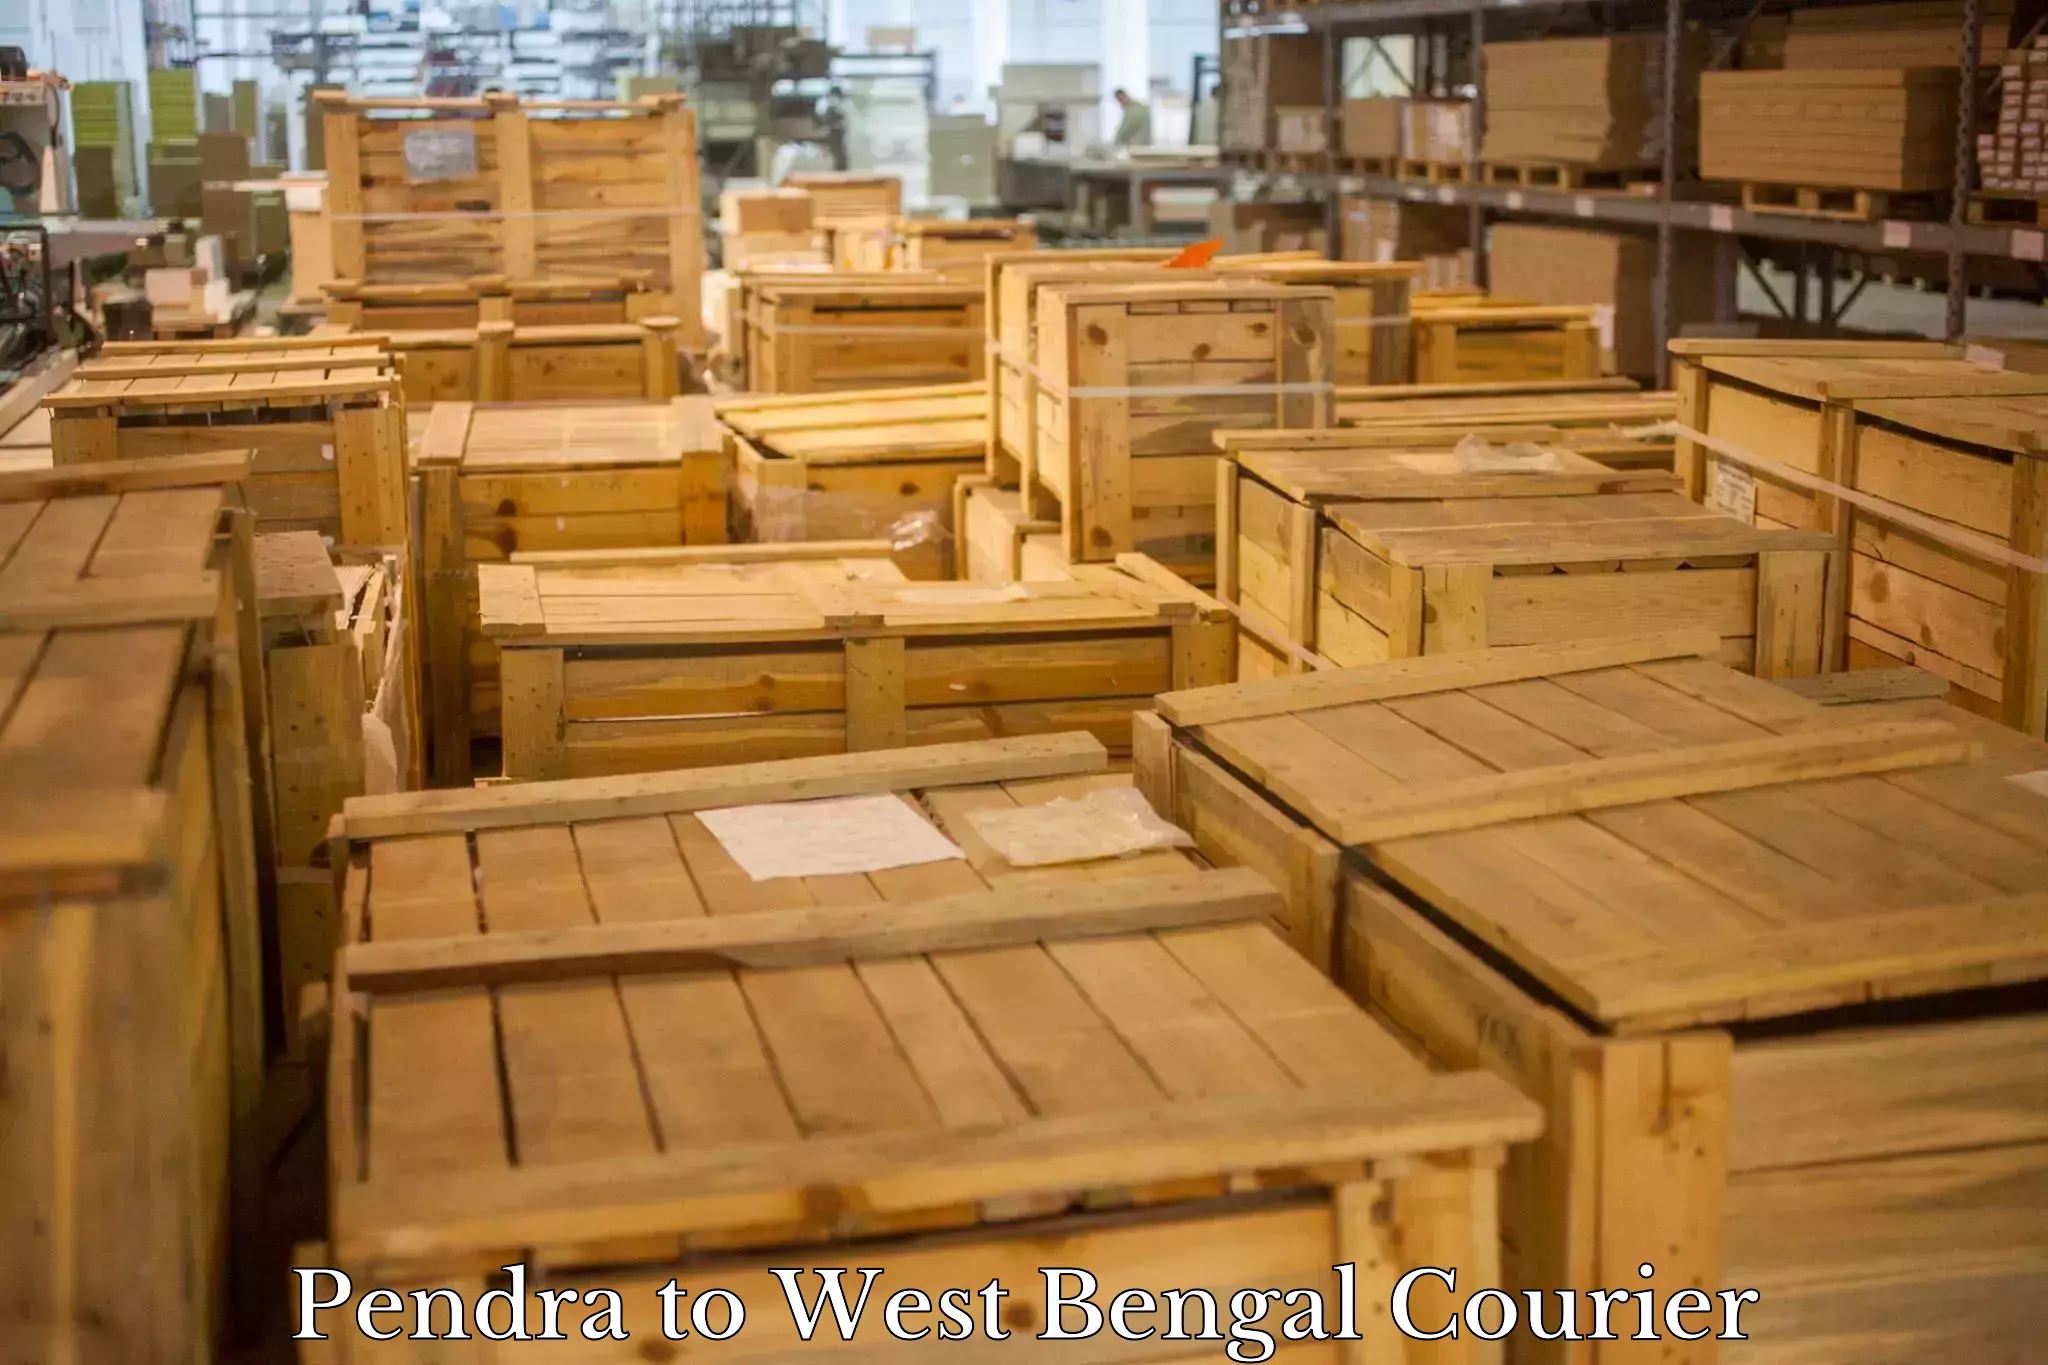 Sustainable shipping practices Pendra to West Bengal